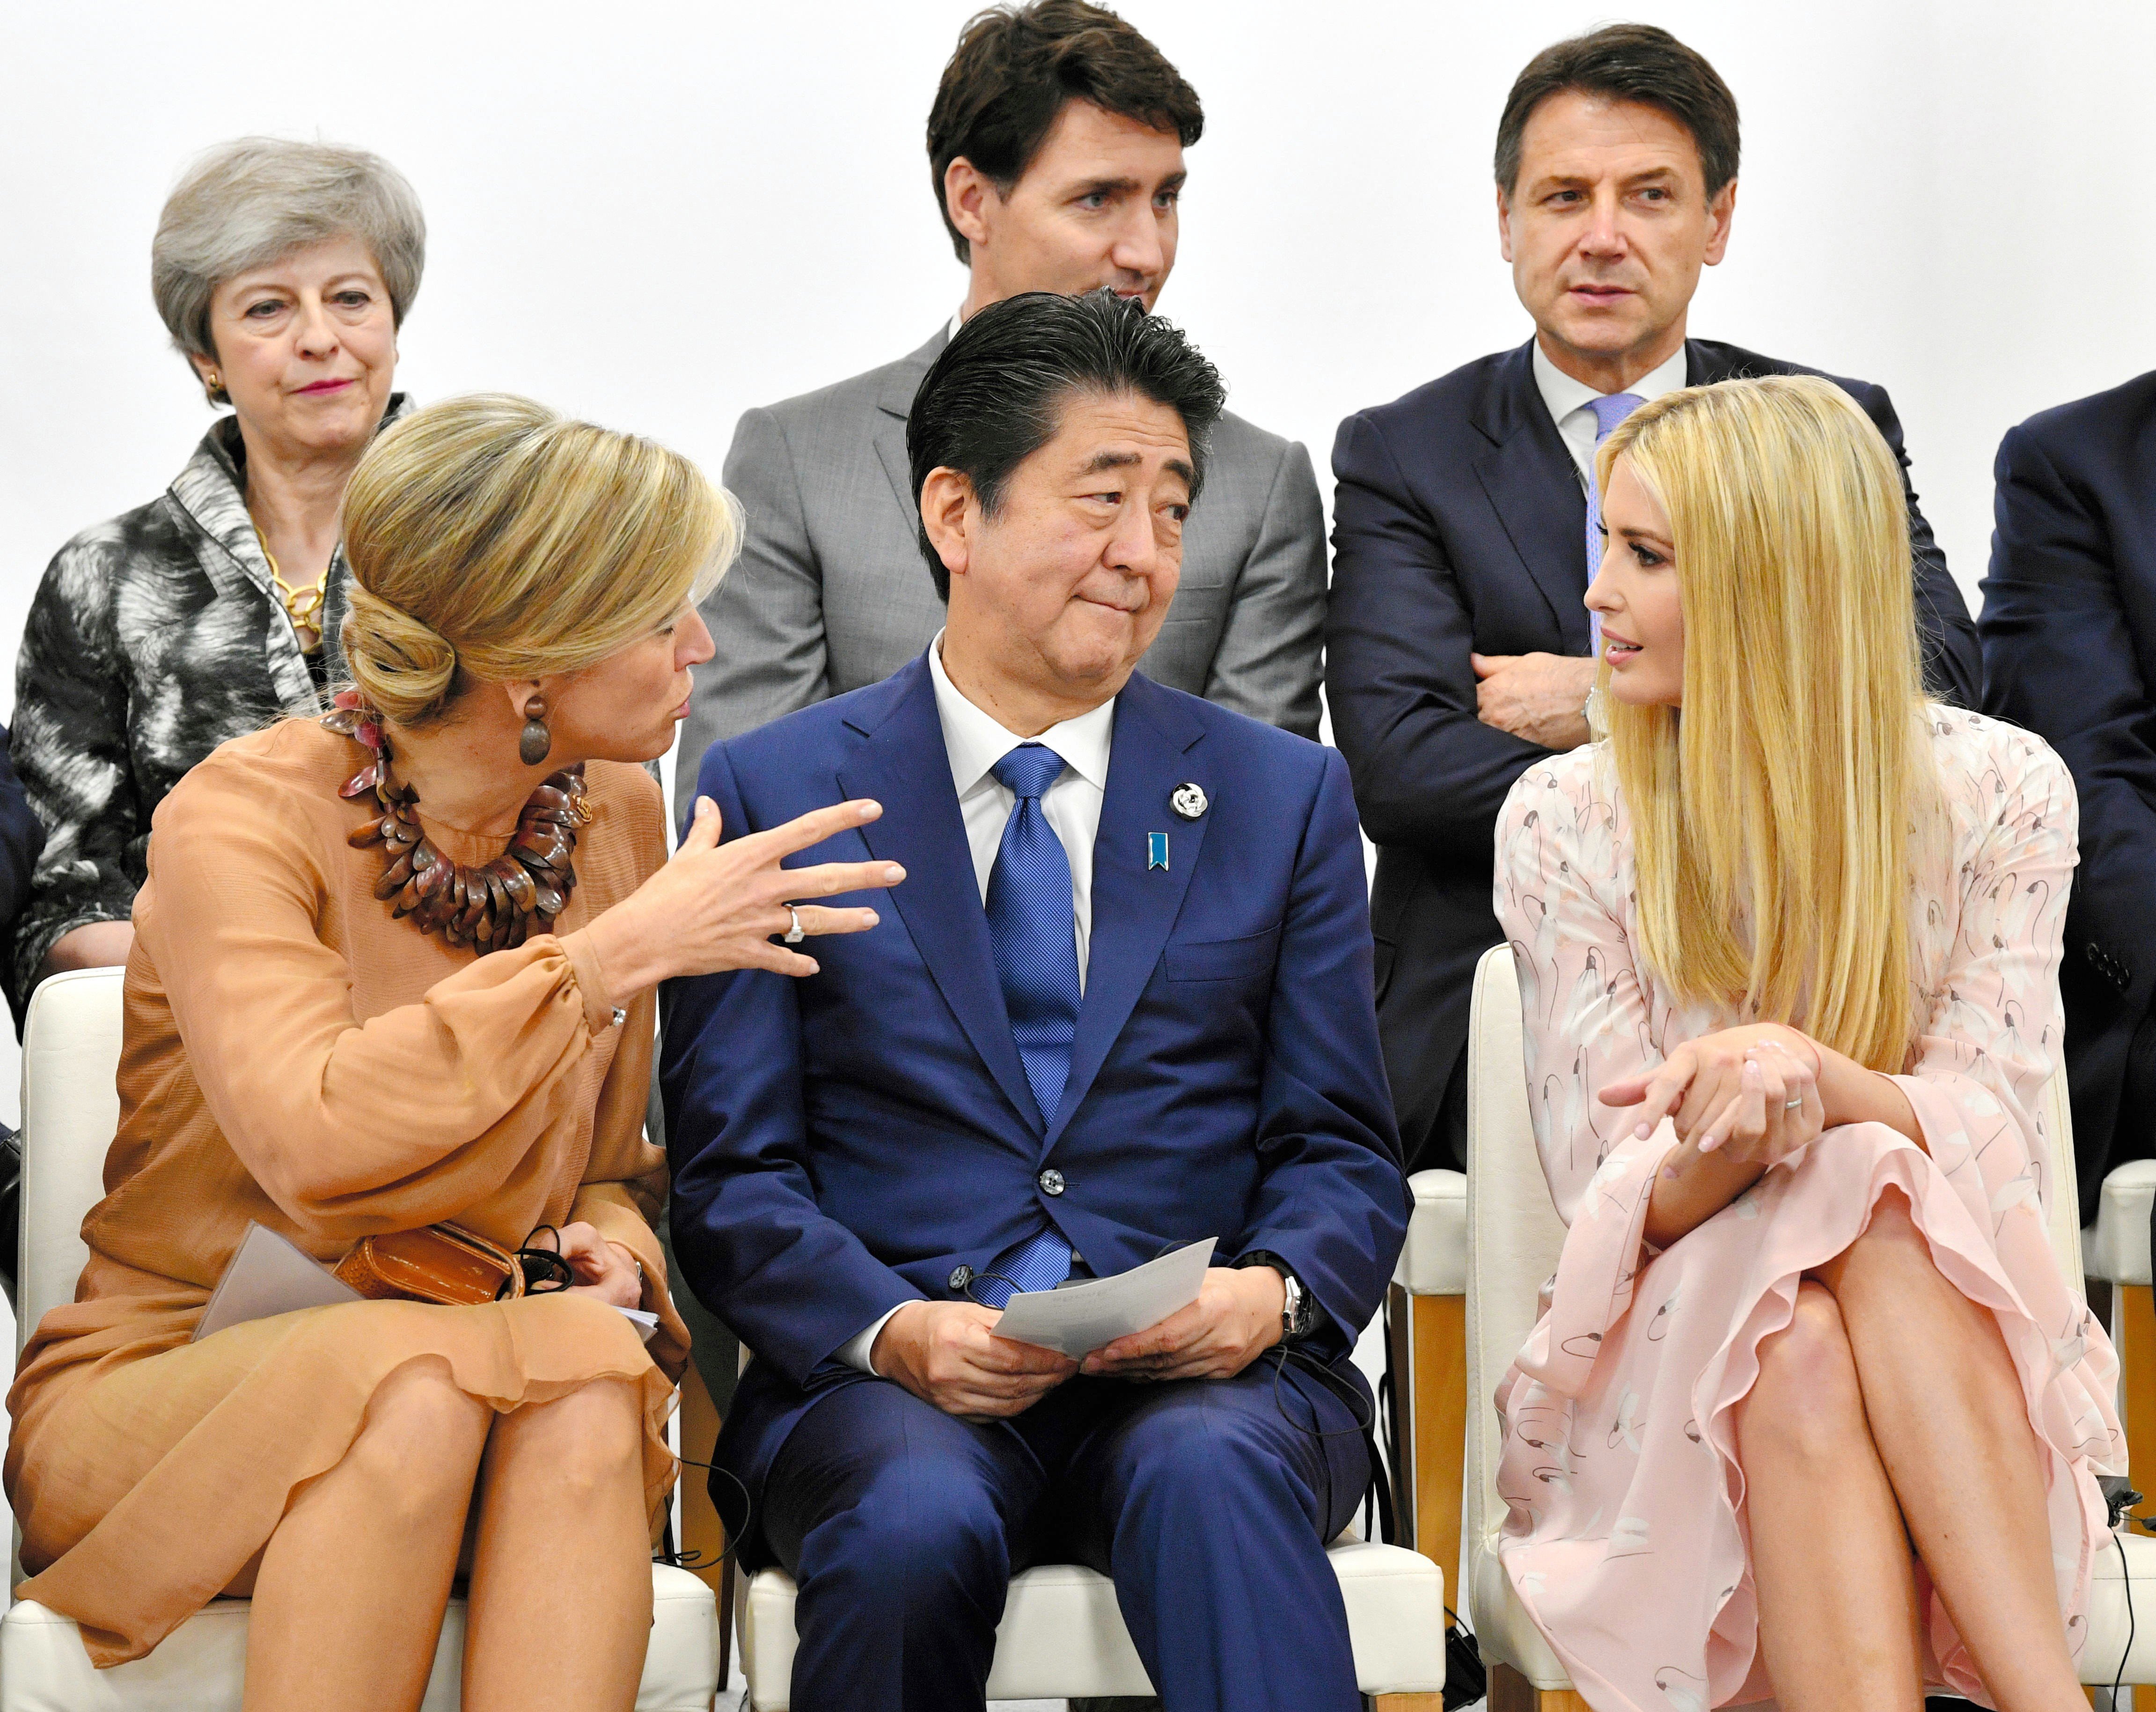 Ivanka Trump, right, with other world leaders at the G20 summit in Osaka, Japan. Photo: EPA